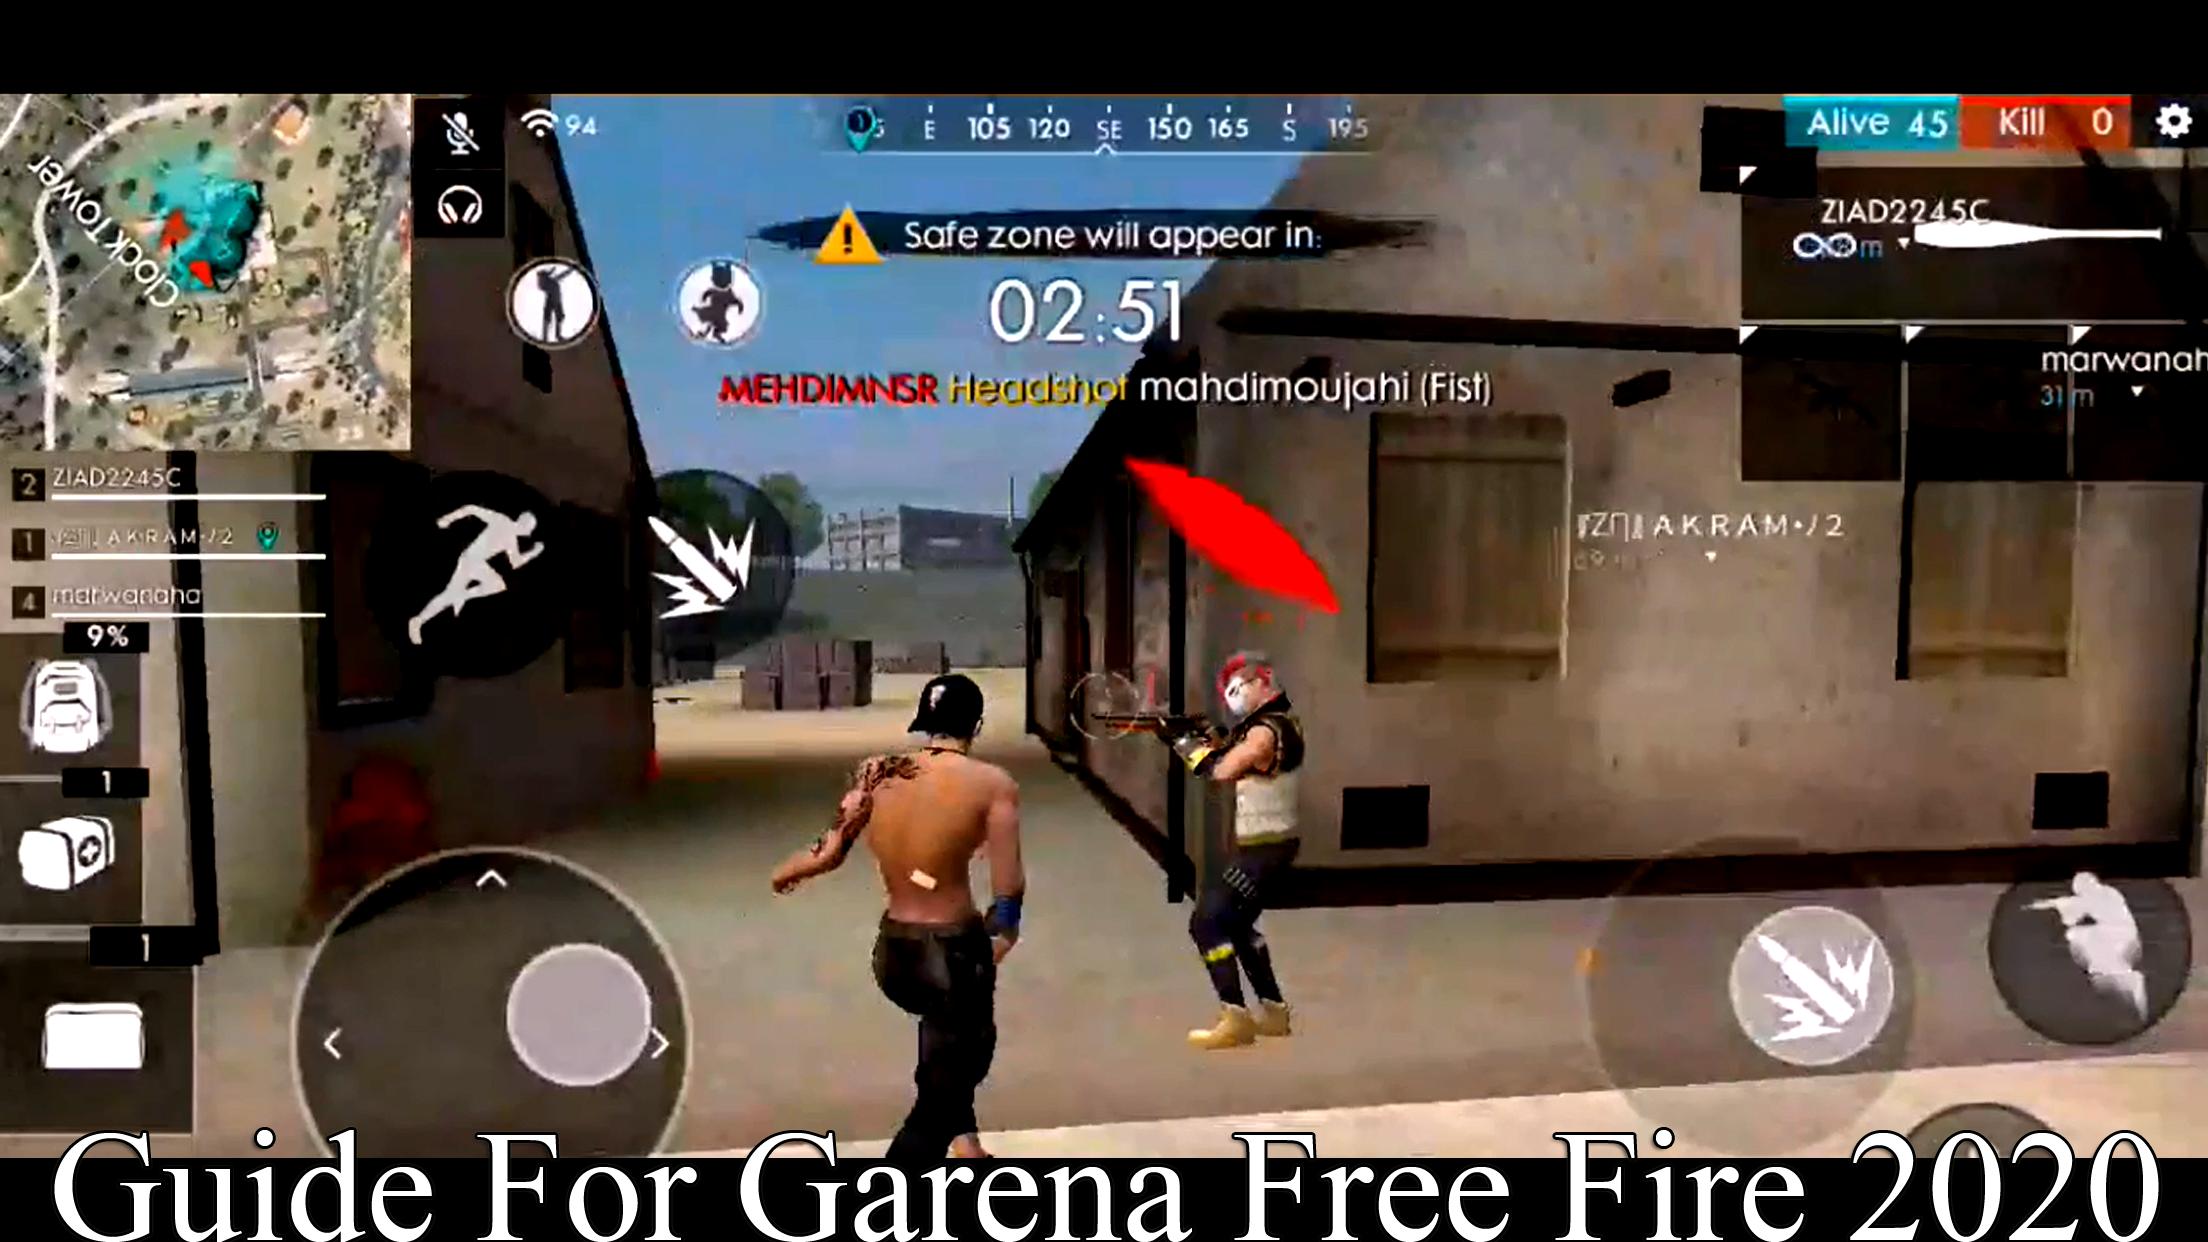 Guide For Garena Free Fire for Android - APK Download - 